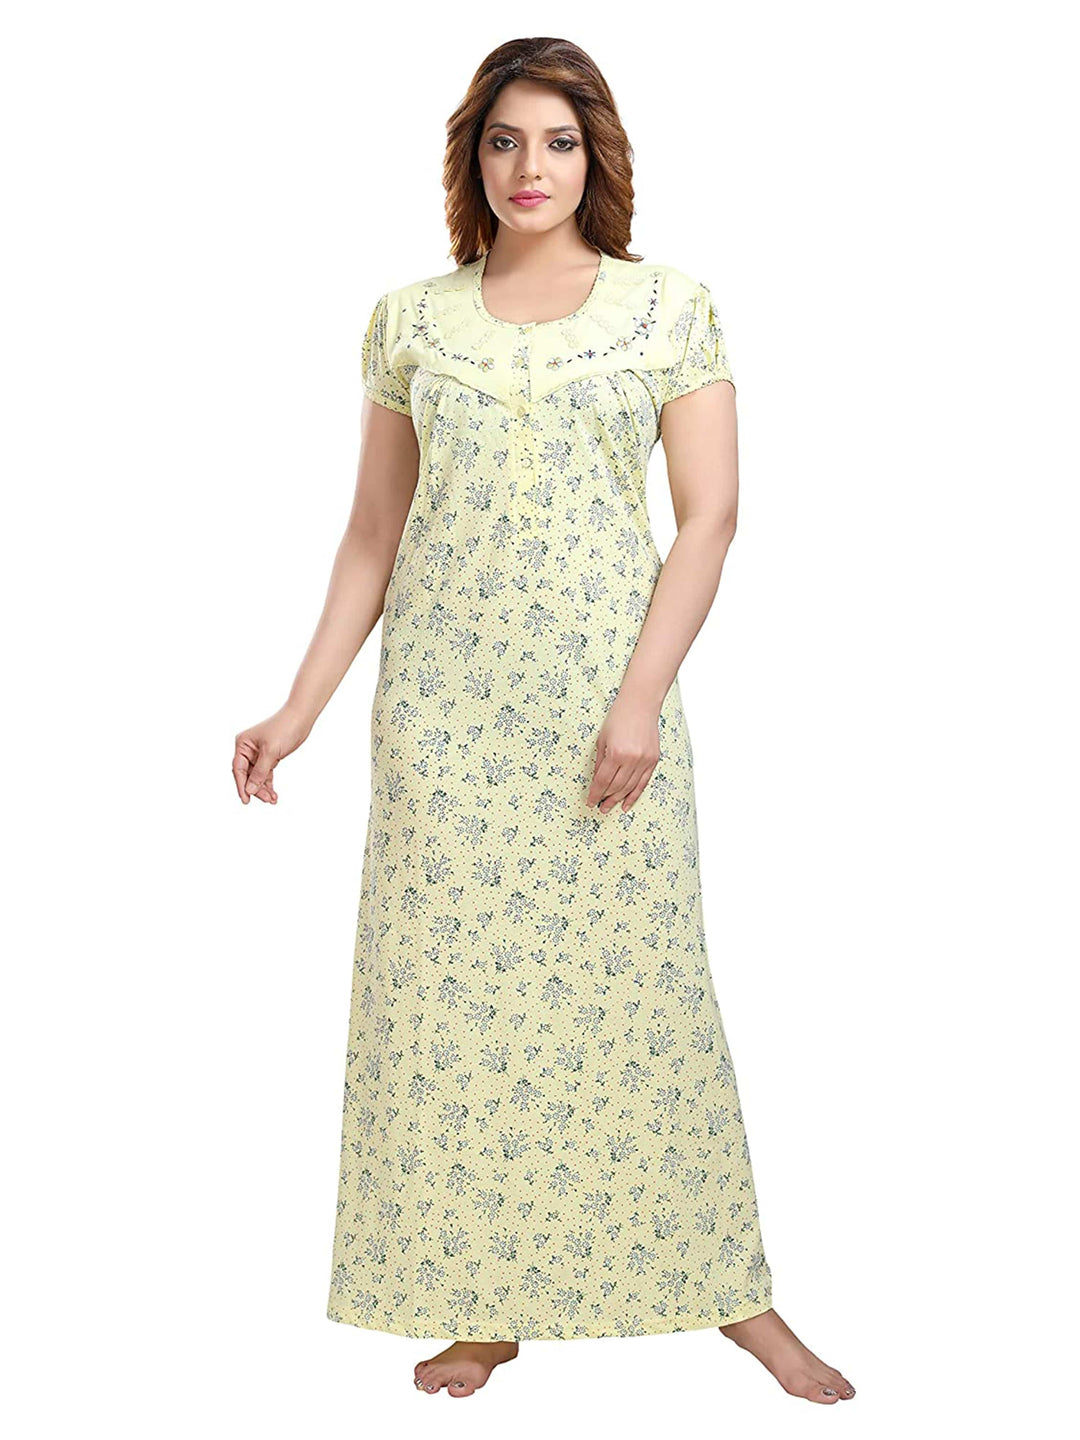  Cotton Blend Nighty  Buy Cotton Blend Designer Yellow Nighty Online in India- 9shines label 